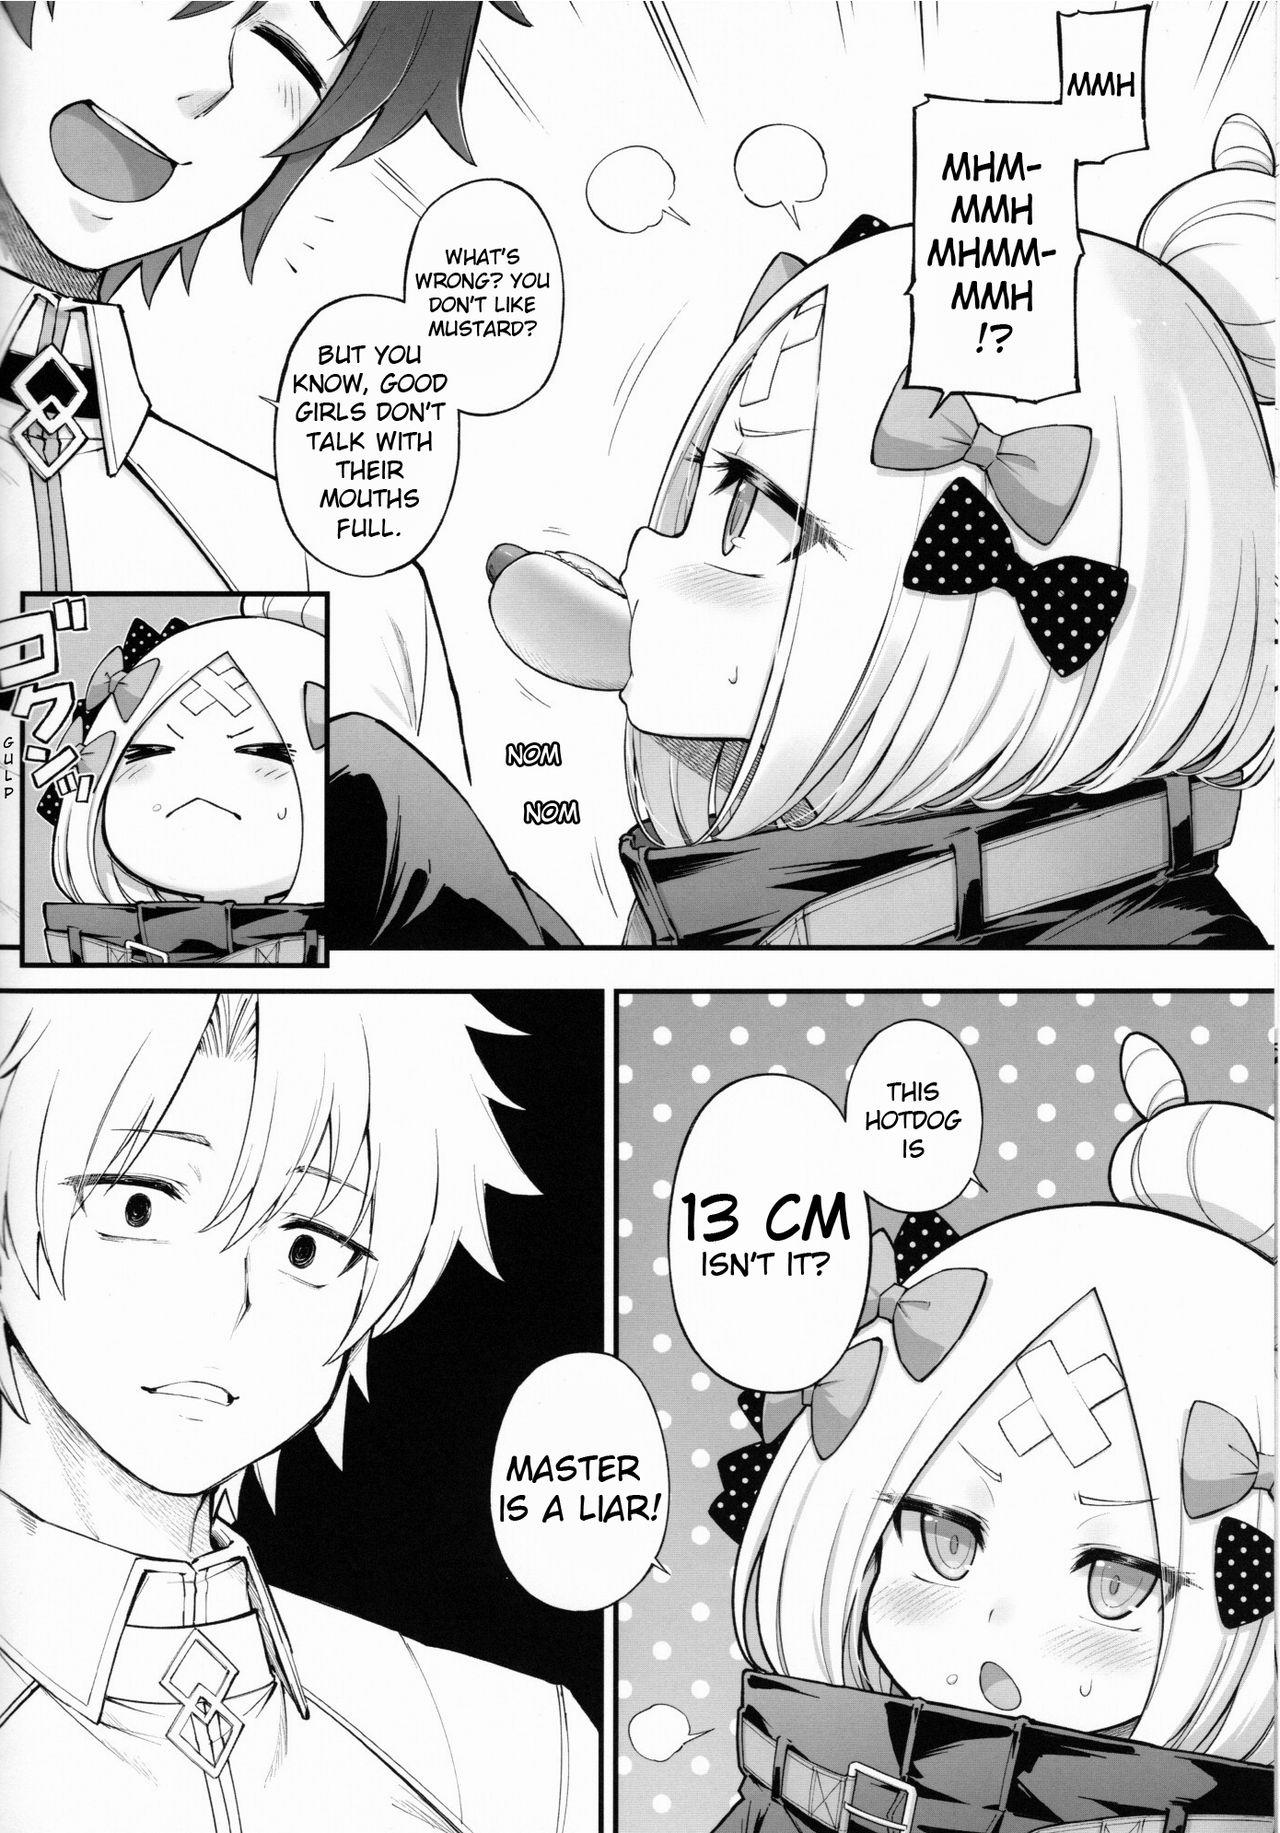 Handsome Abibibi 2 - Fate grand order 18 Year Old - Page 5